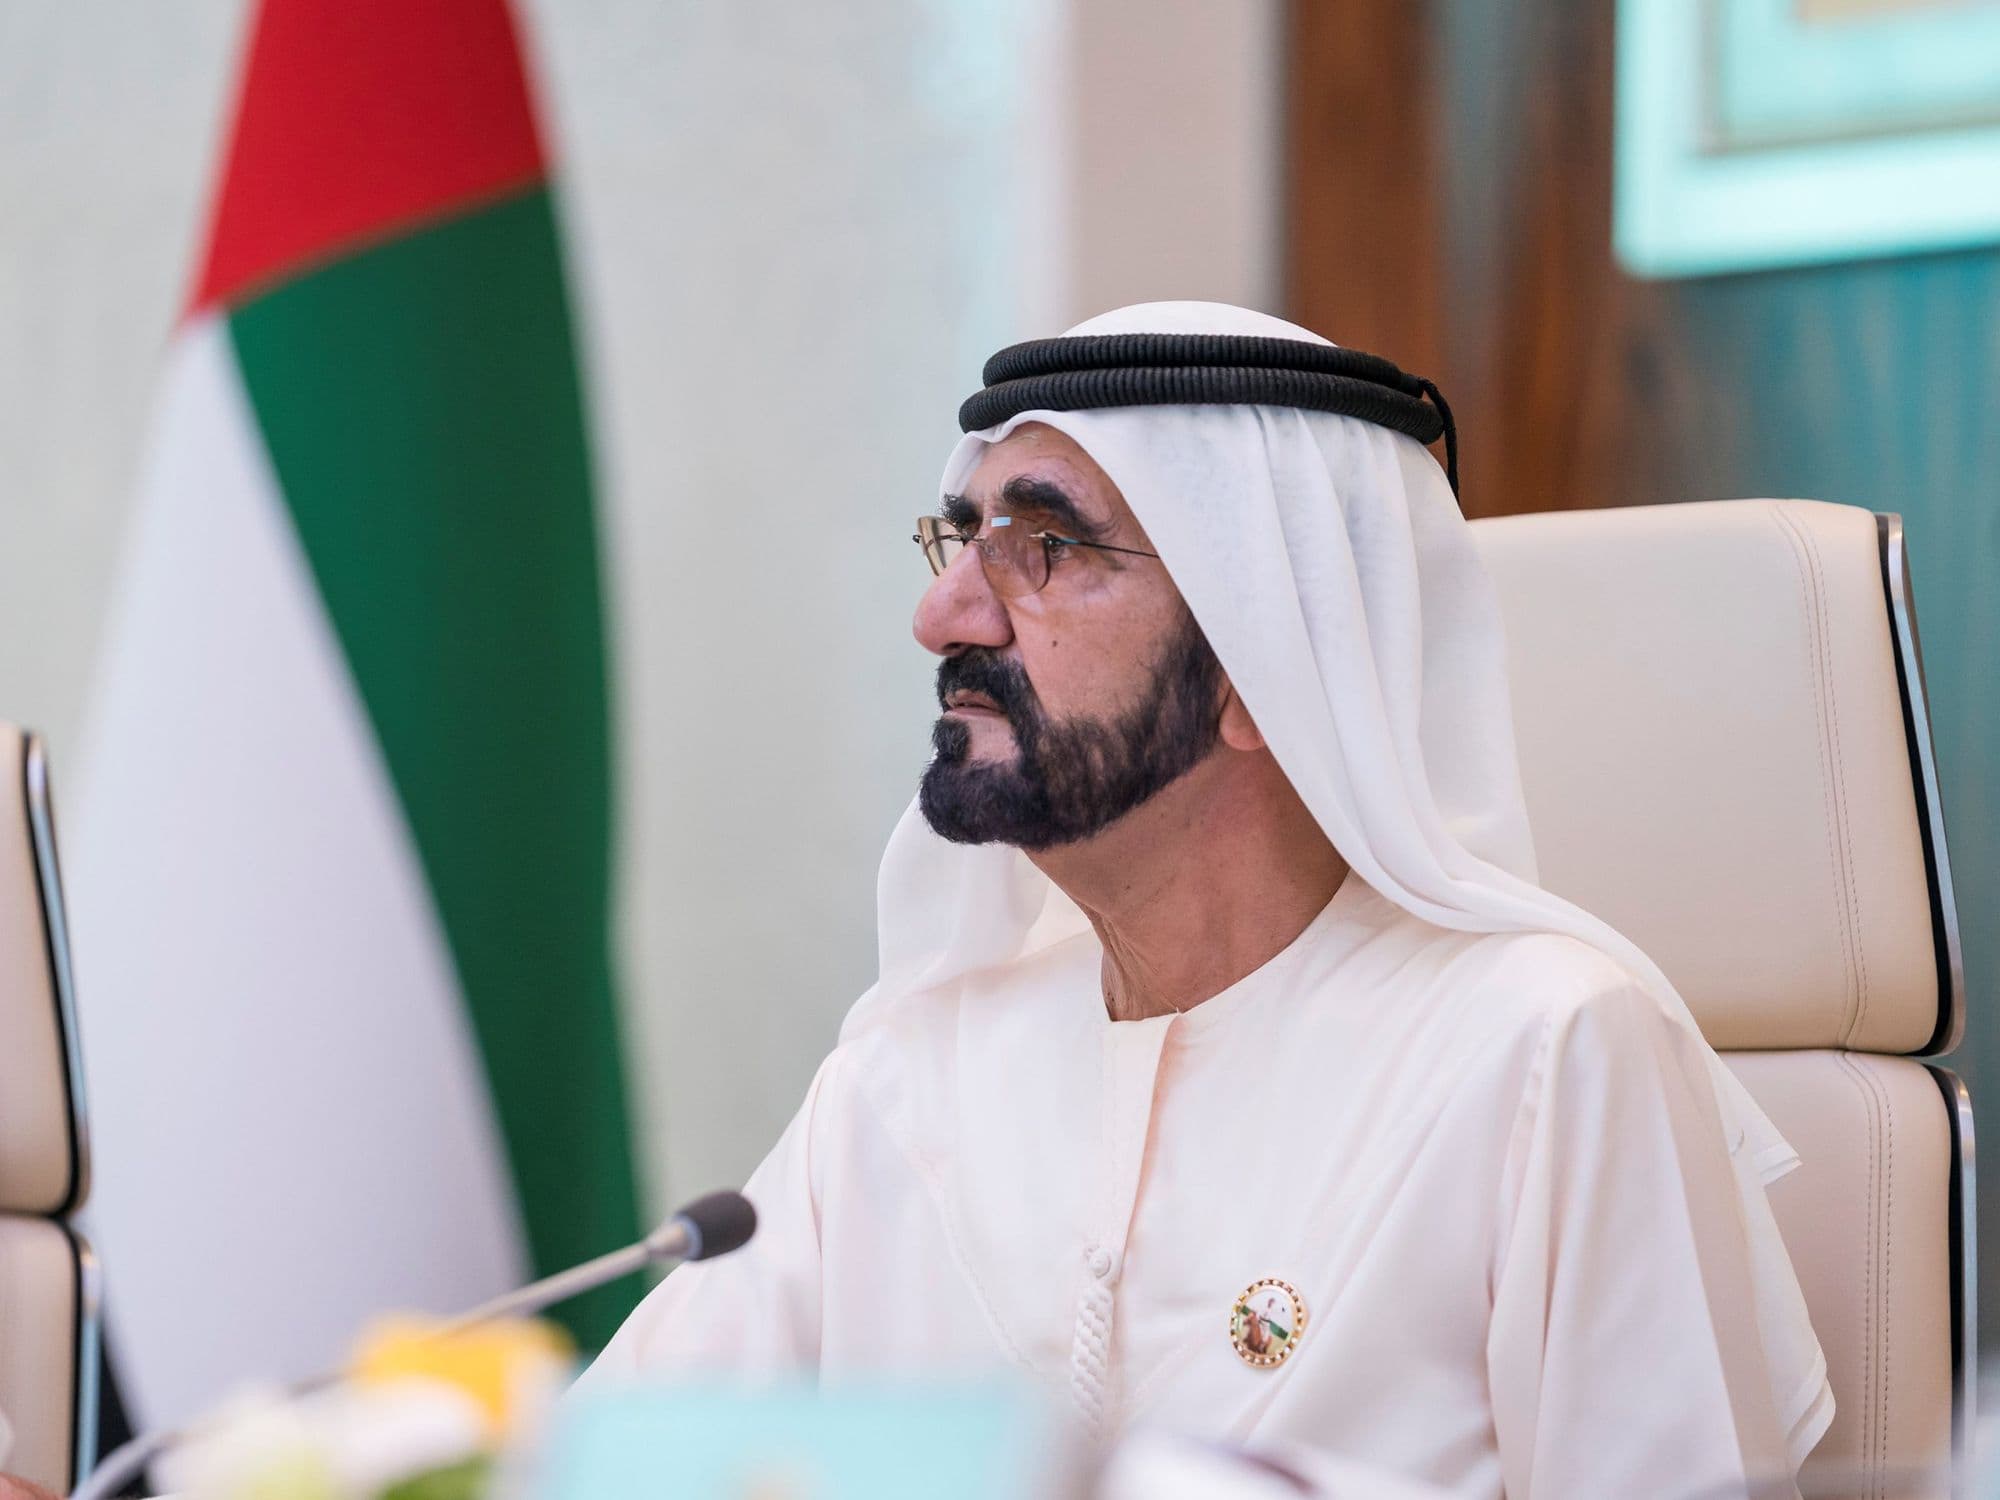 UAE to Give Civil Servants a One-Year Paid Leave to Start a Business